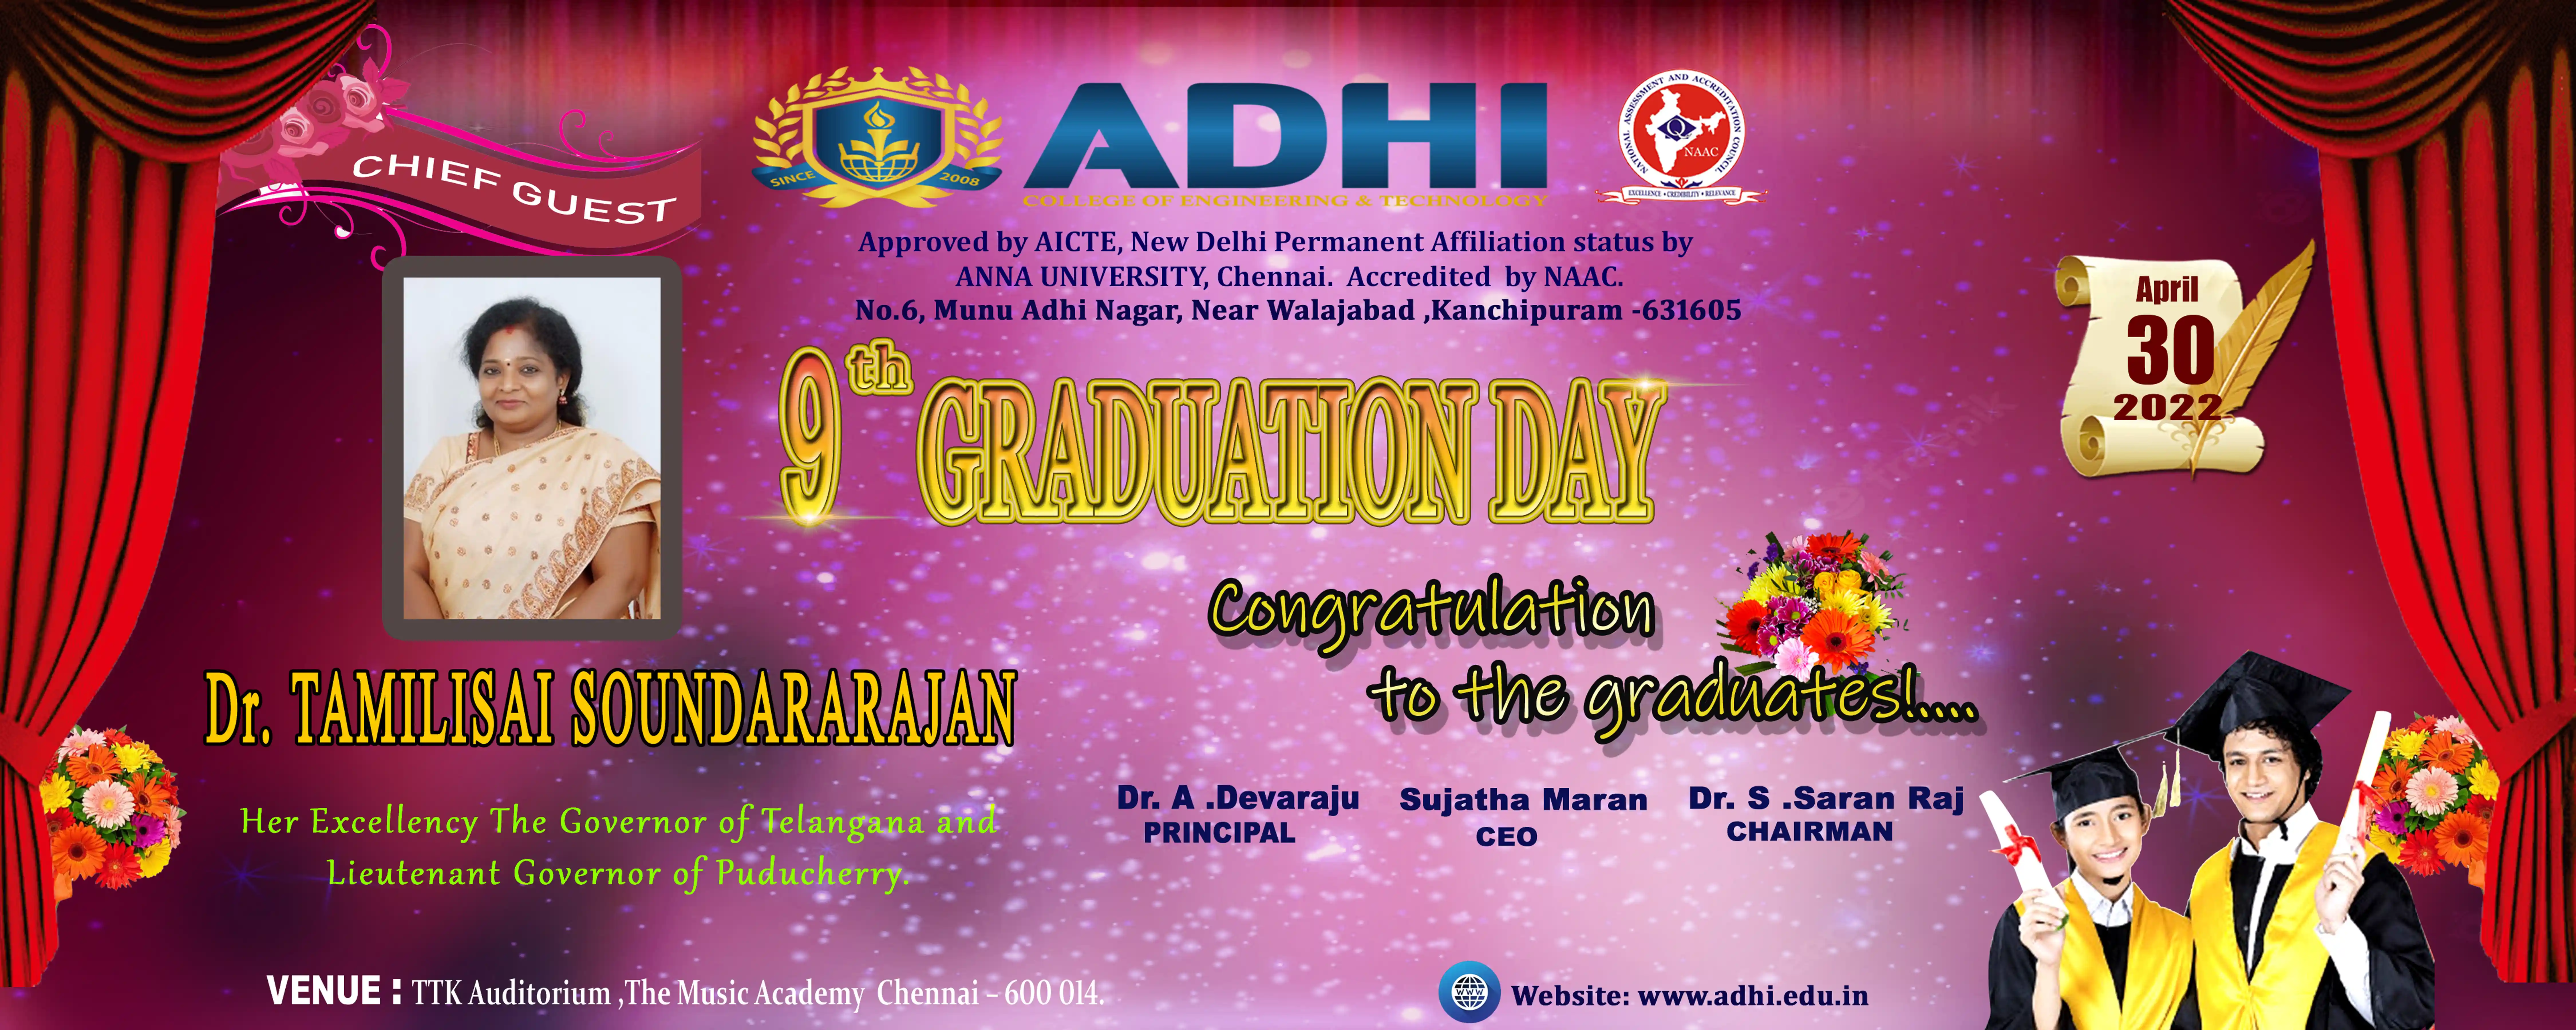 Adhi College of Engineering & Technology